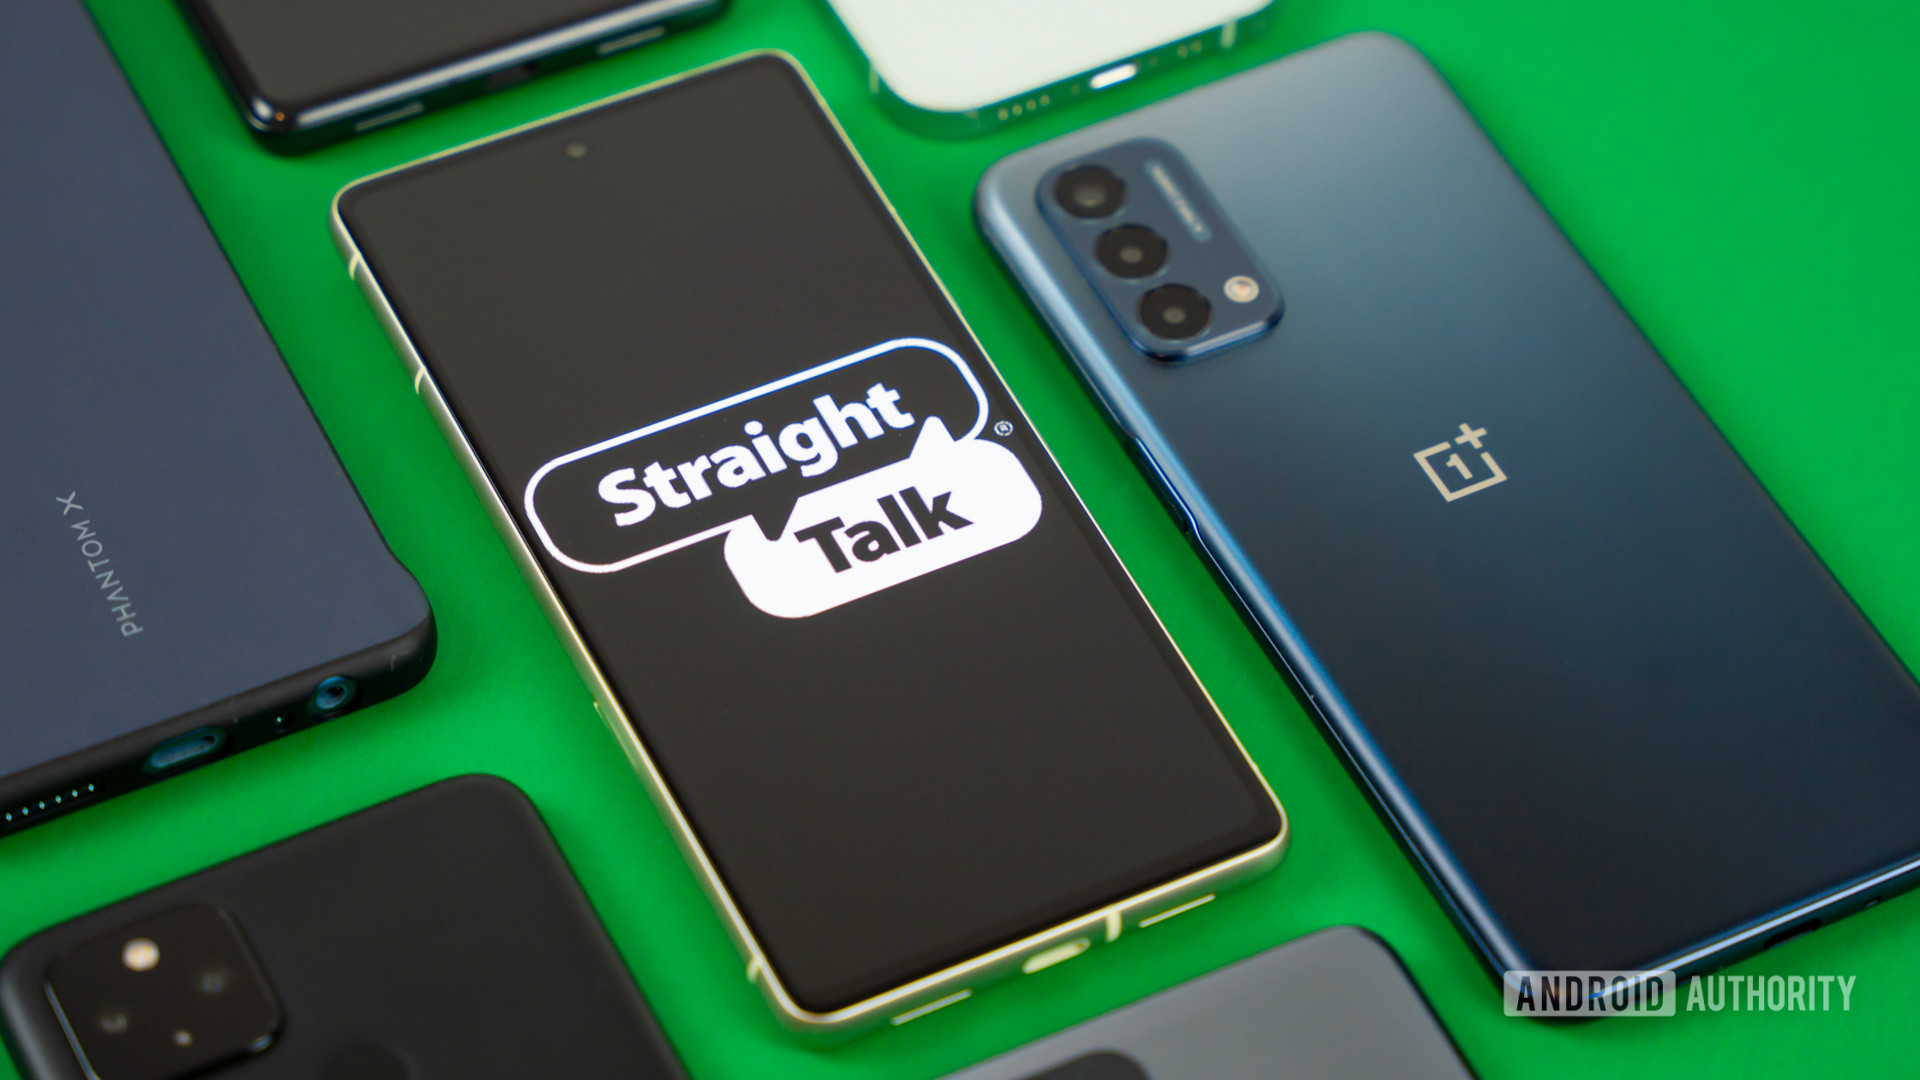 Stock photo of Straight Talk logo on phone with many devices 5